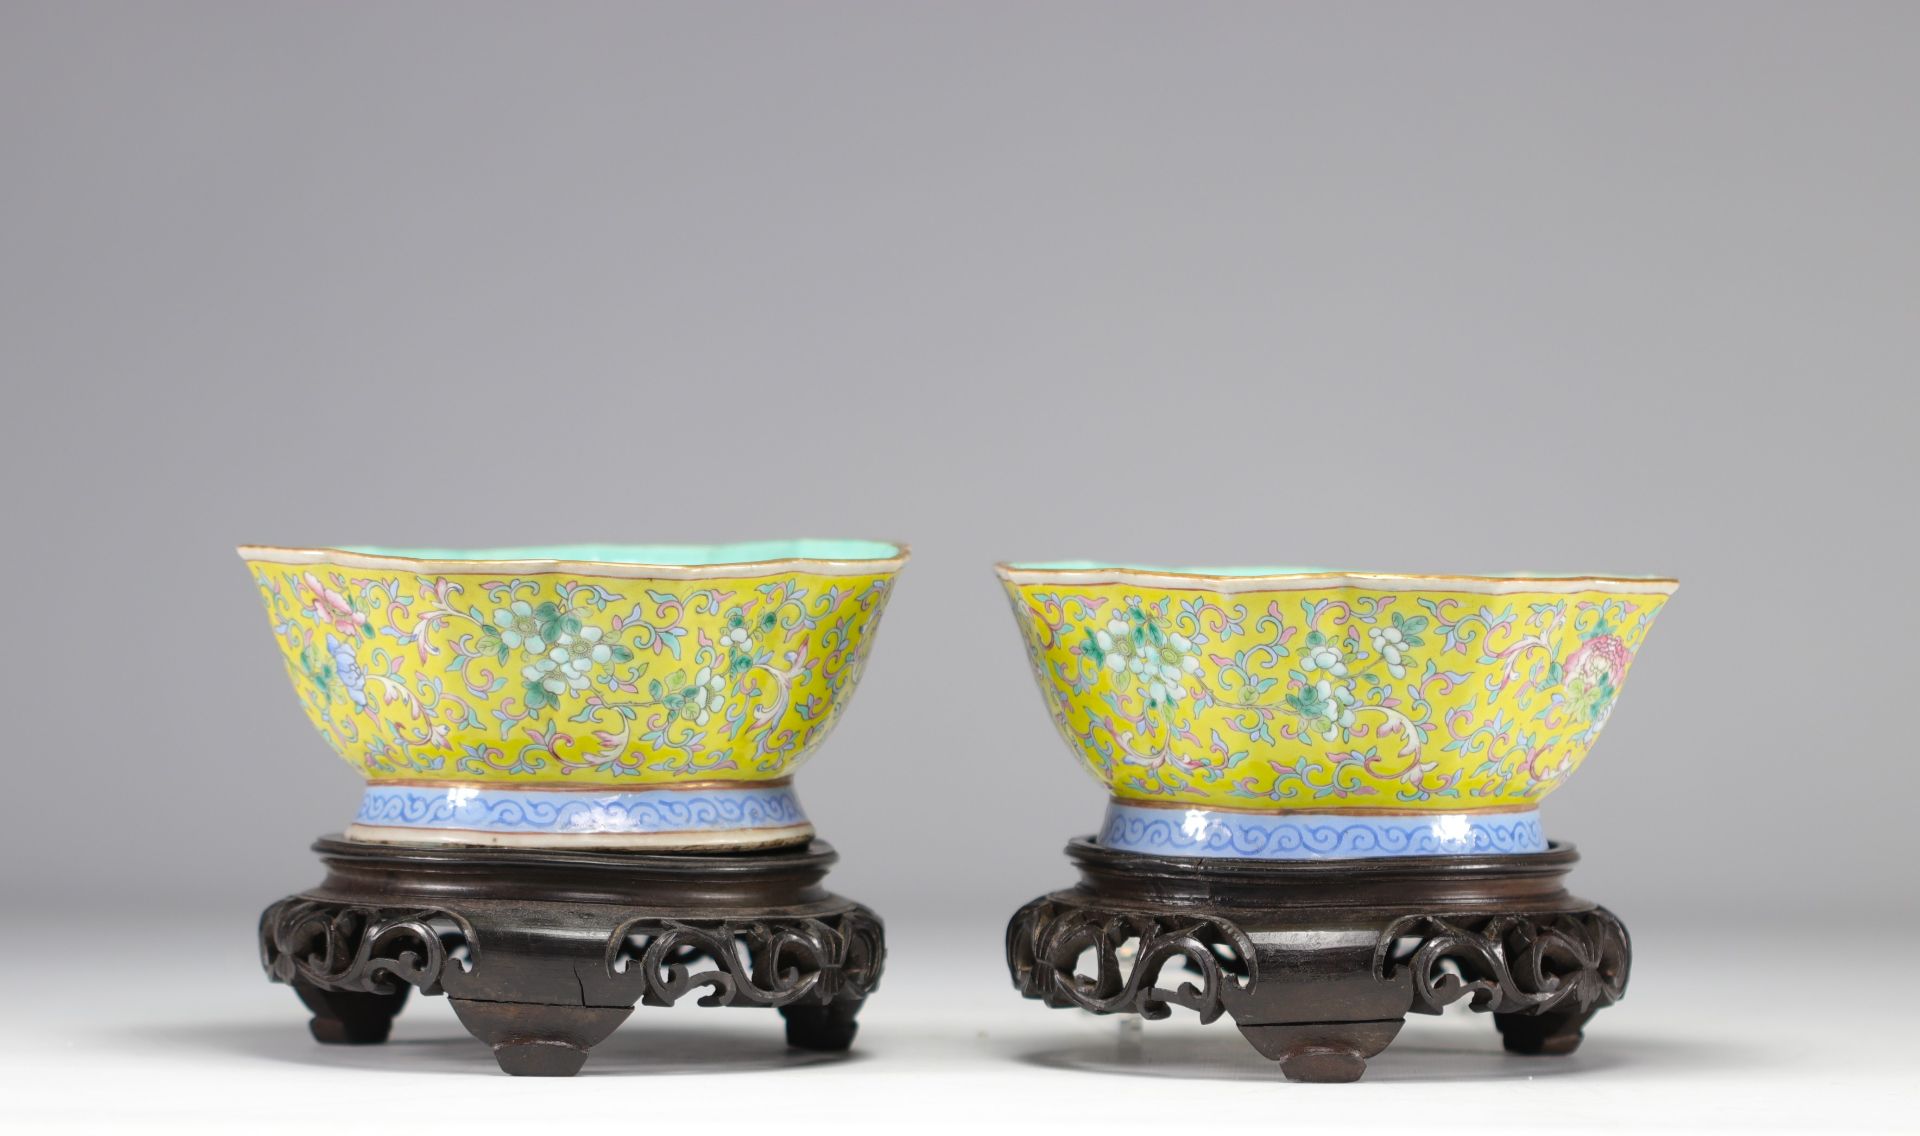 Pair of Famille Rose porcelain bowls decorated with flowers on a yellow background from 19th century